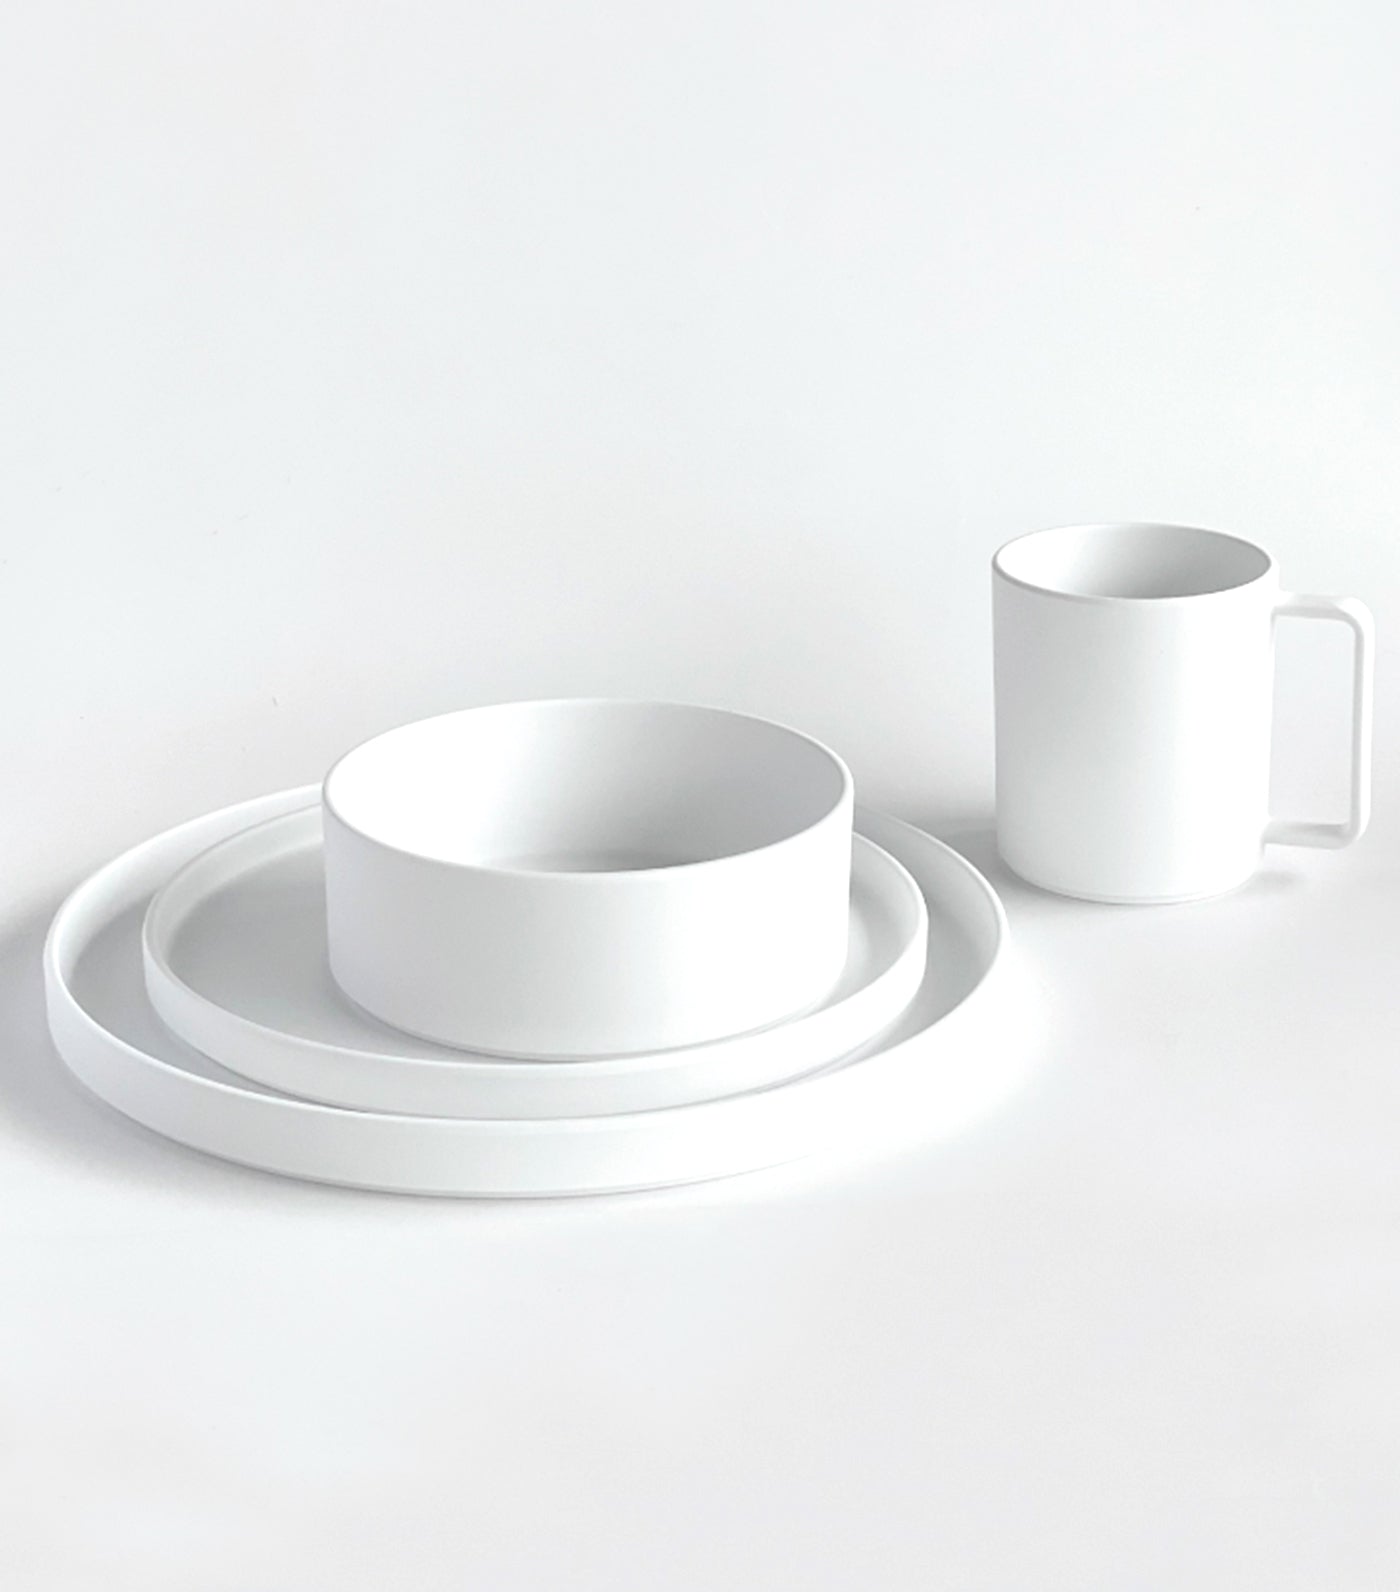 Simpli by Clever Spaces 4-Piece Dinnerware Set